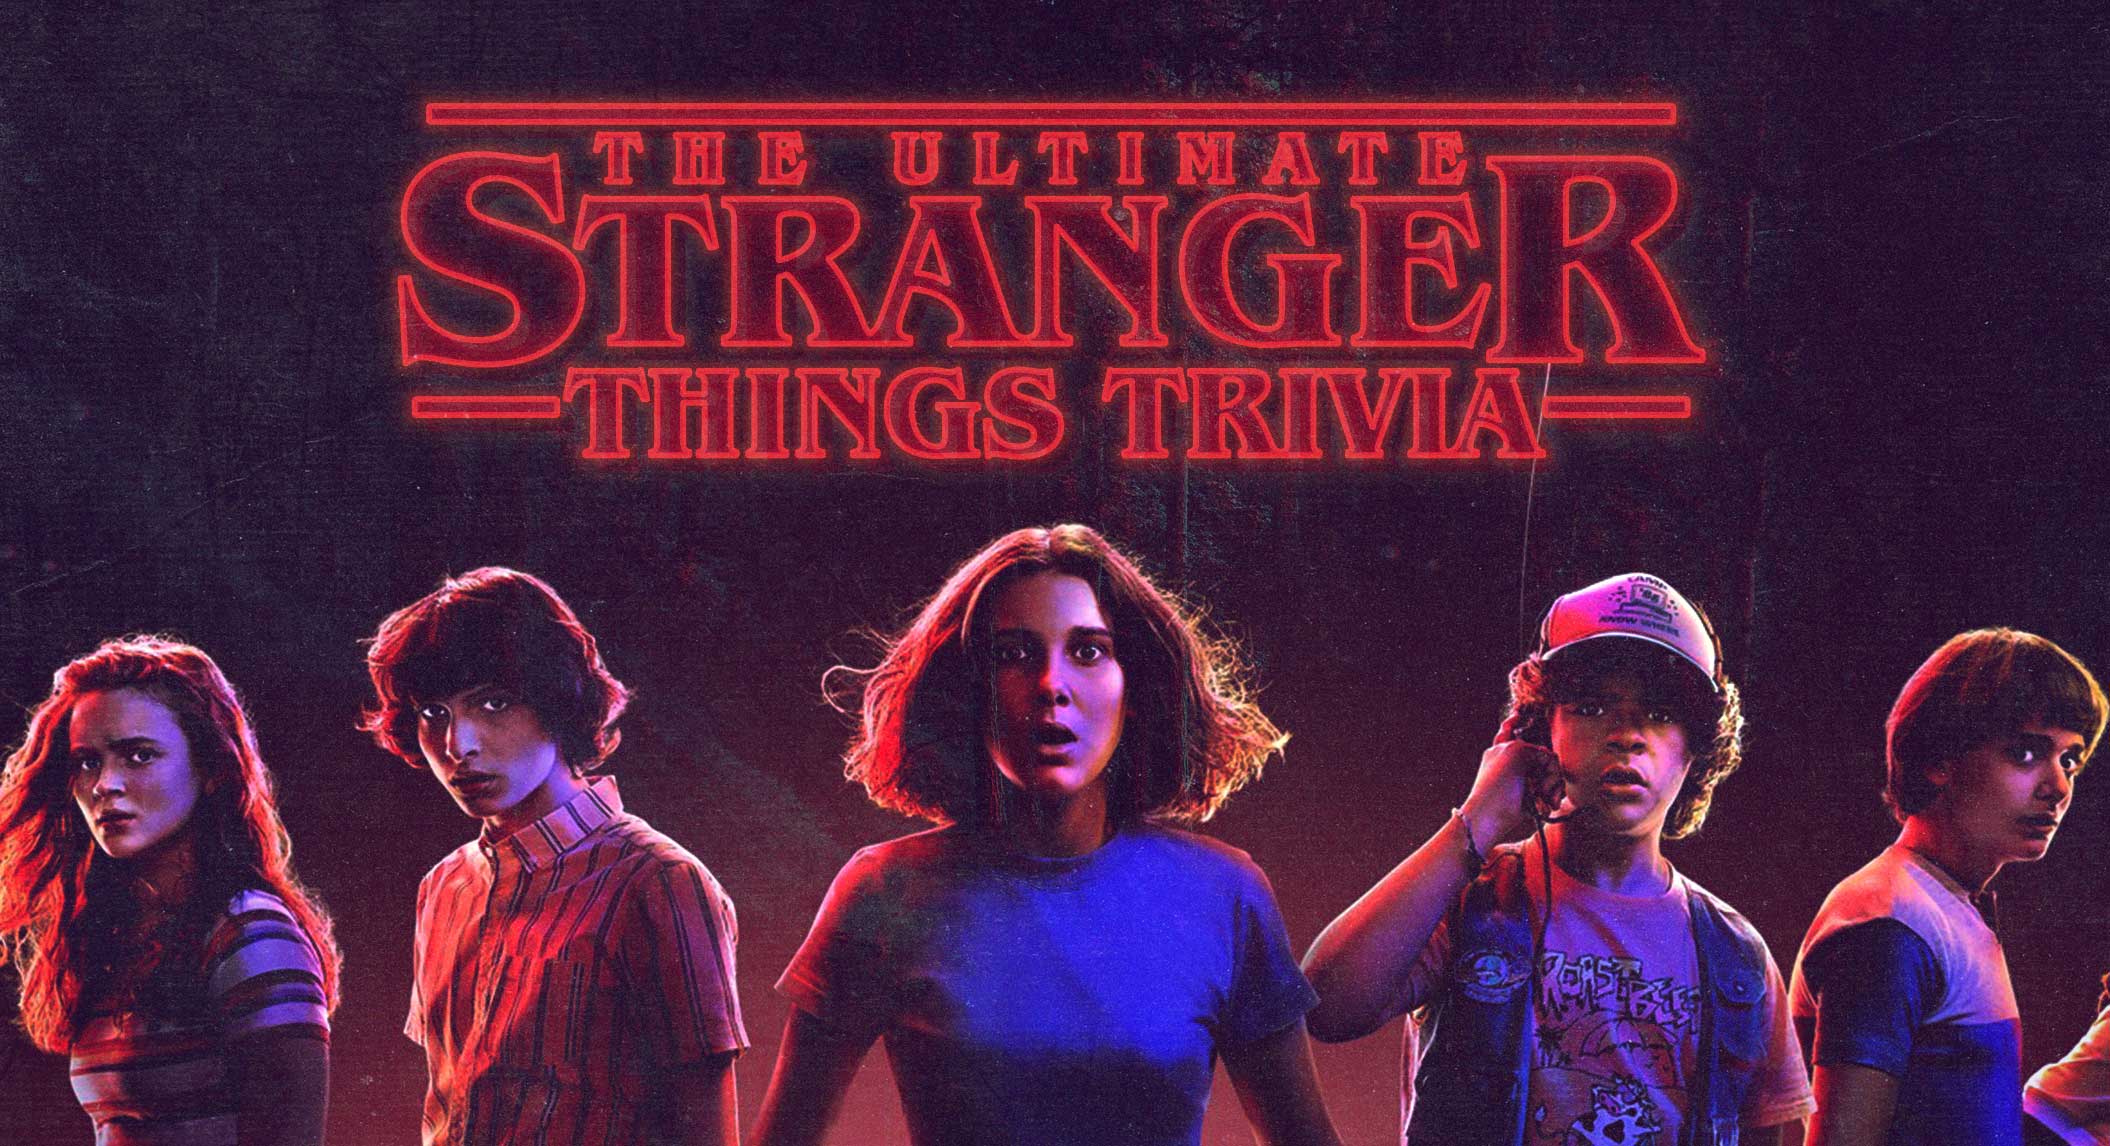 image of the Max, Mike, Eleven, Dusty and Will from Netflix's stranger things, left to right, with the words "The Ultimate Stranger Things Trivia" written in the red Stranger Things font above them.